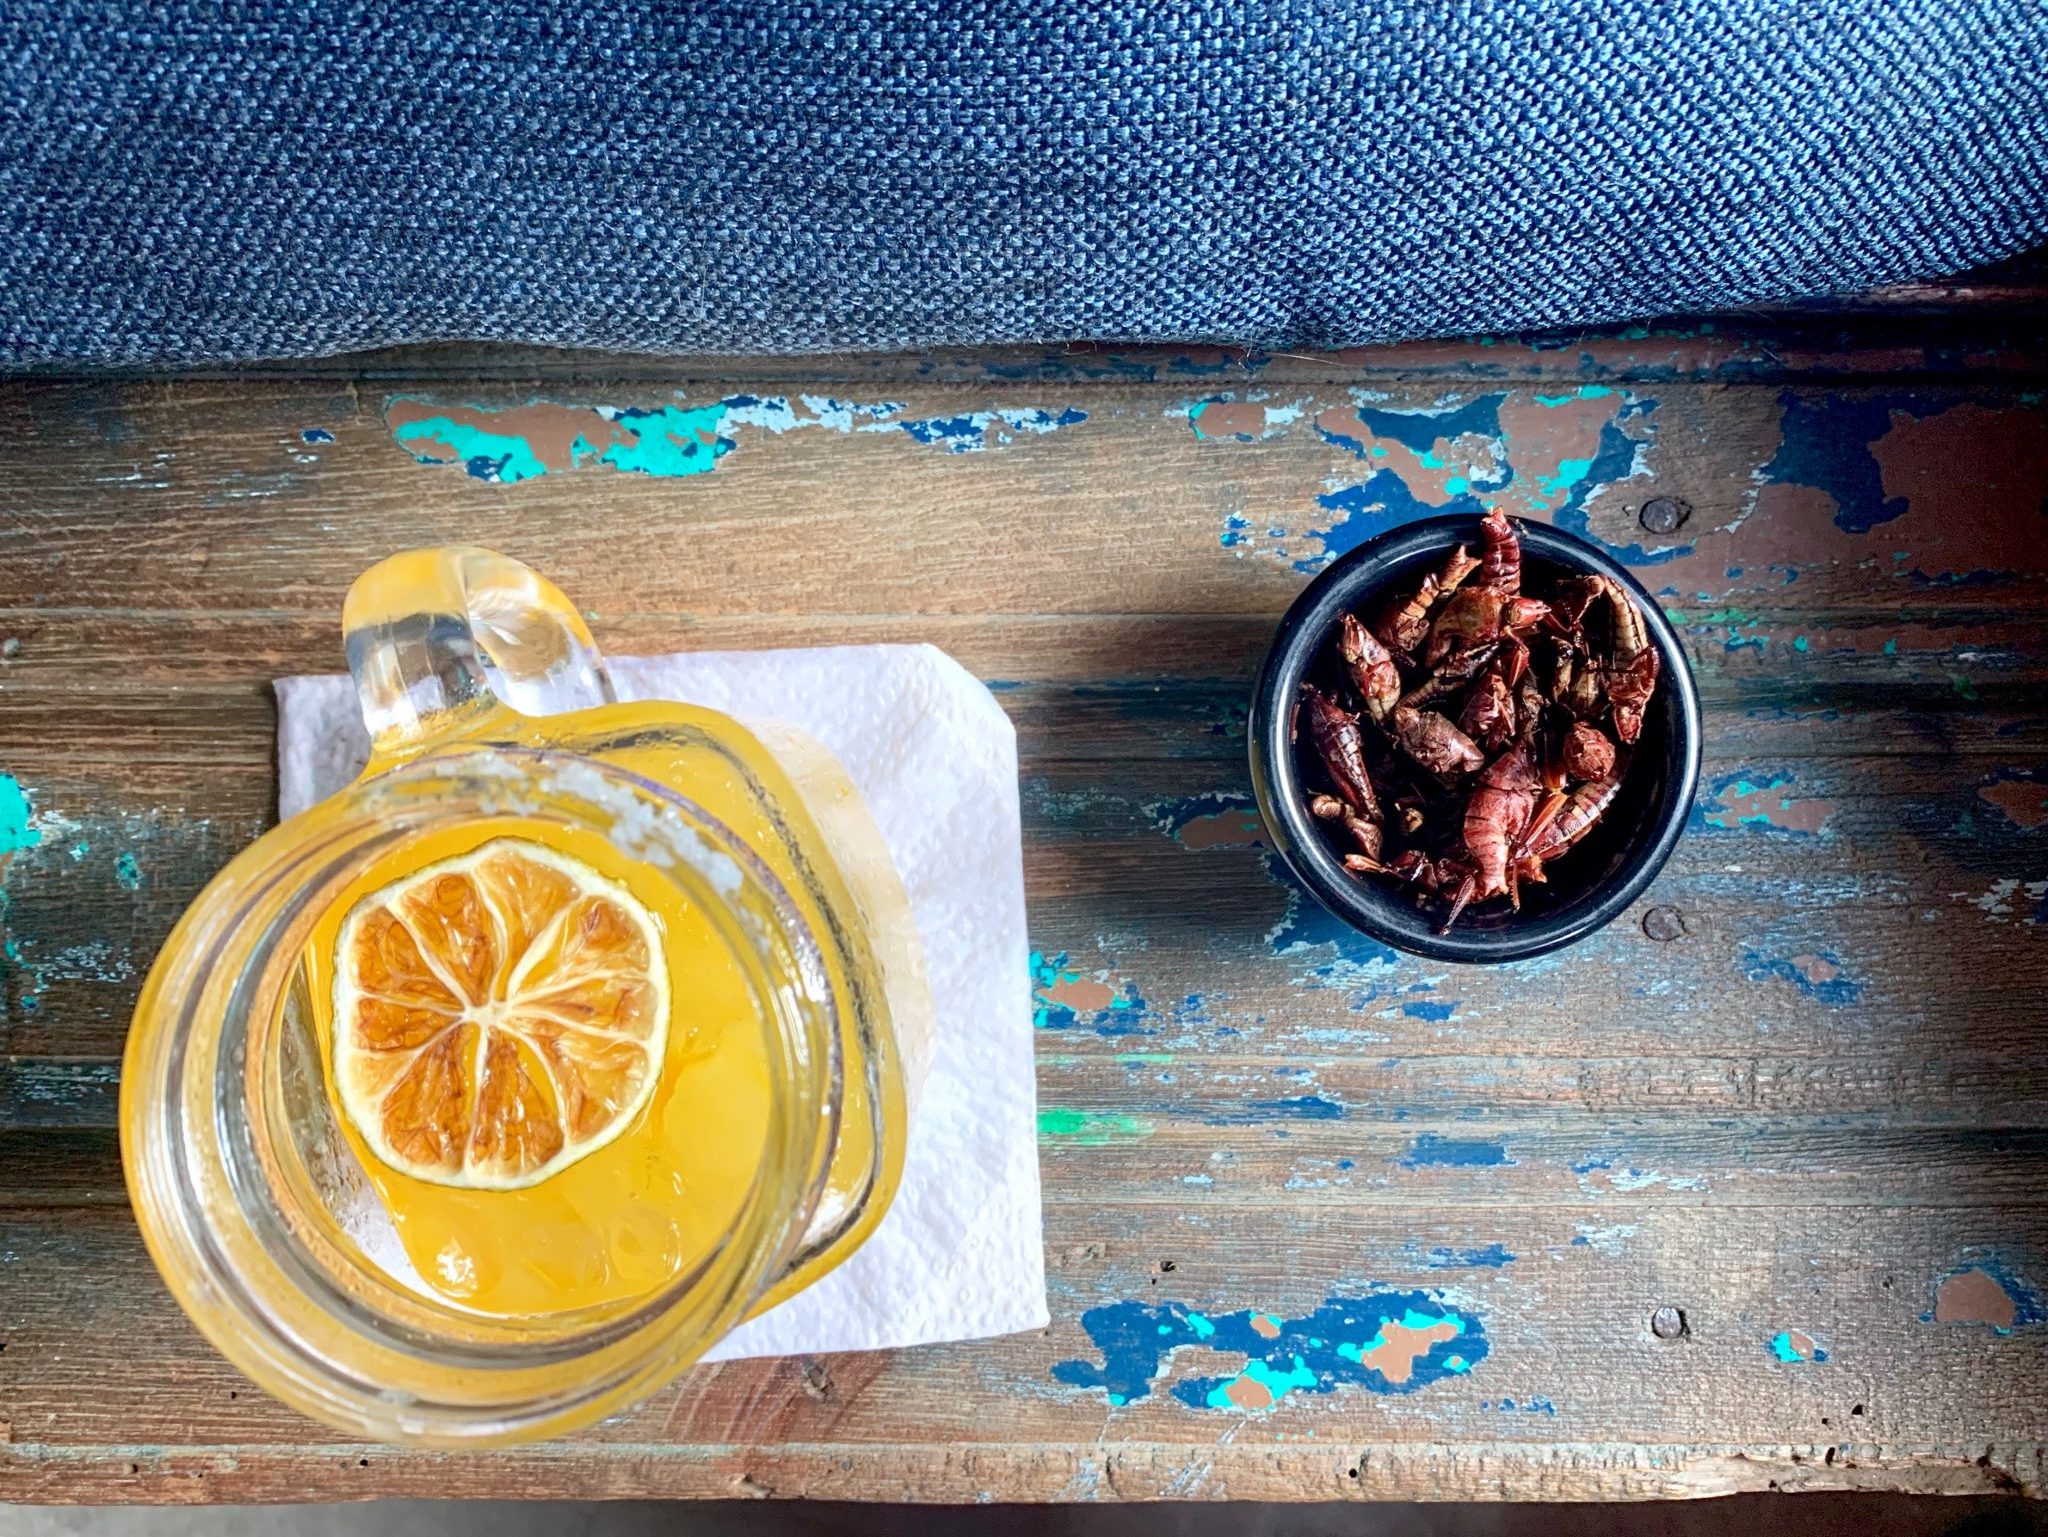 A pitcher of lemonade and a bowl of crickets sit on top of a wooden table.